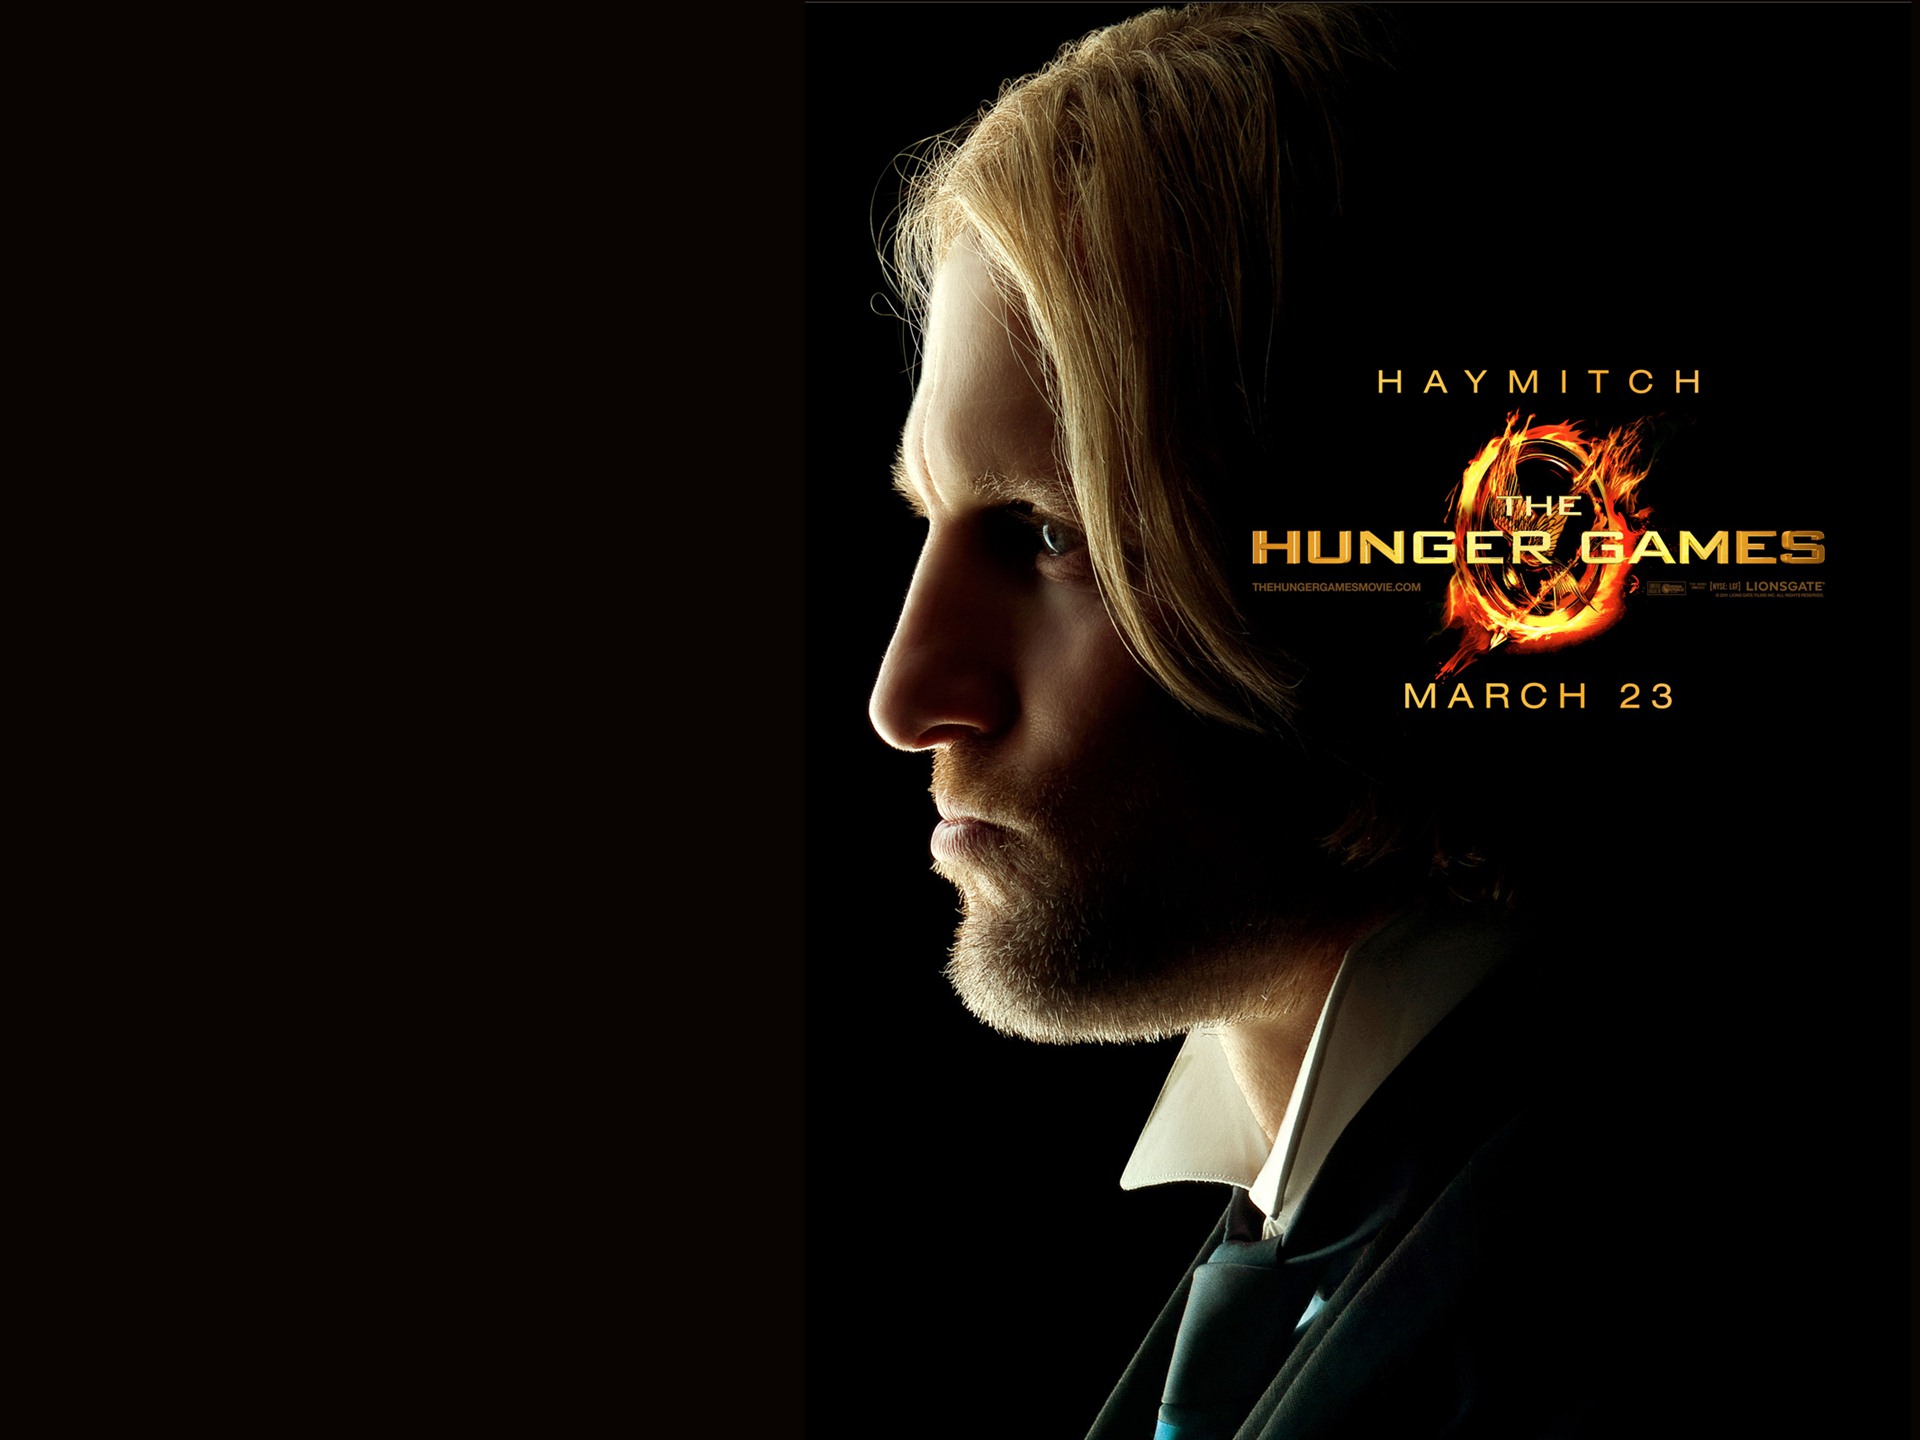 The Hunger Games HD wallpapers #12 - 1920x1440